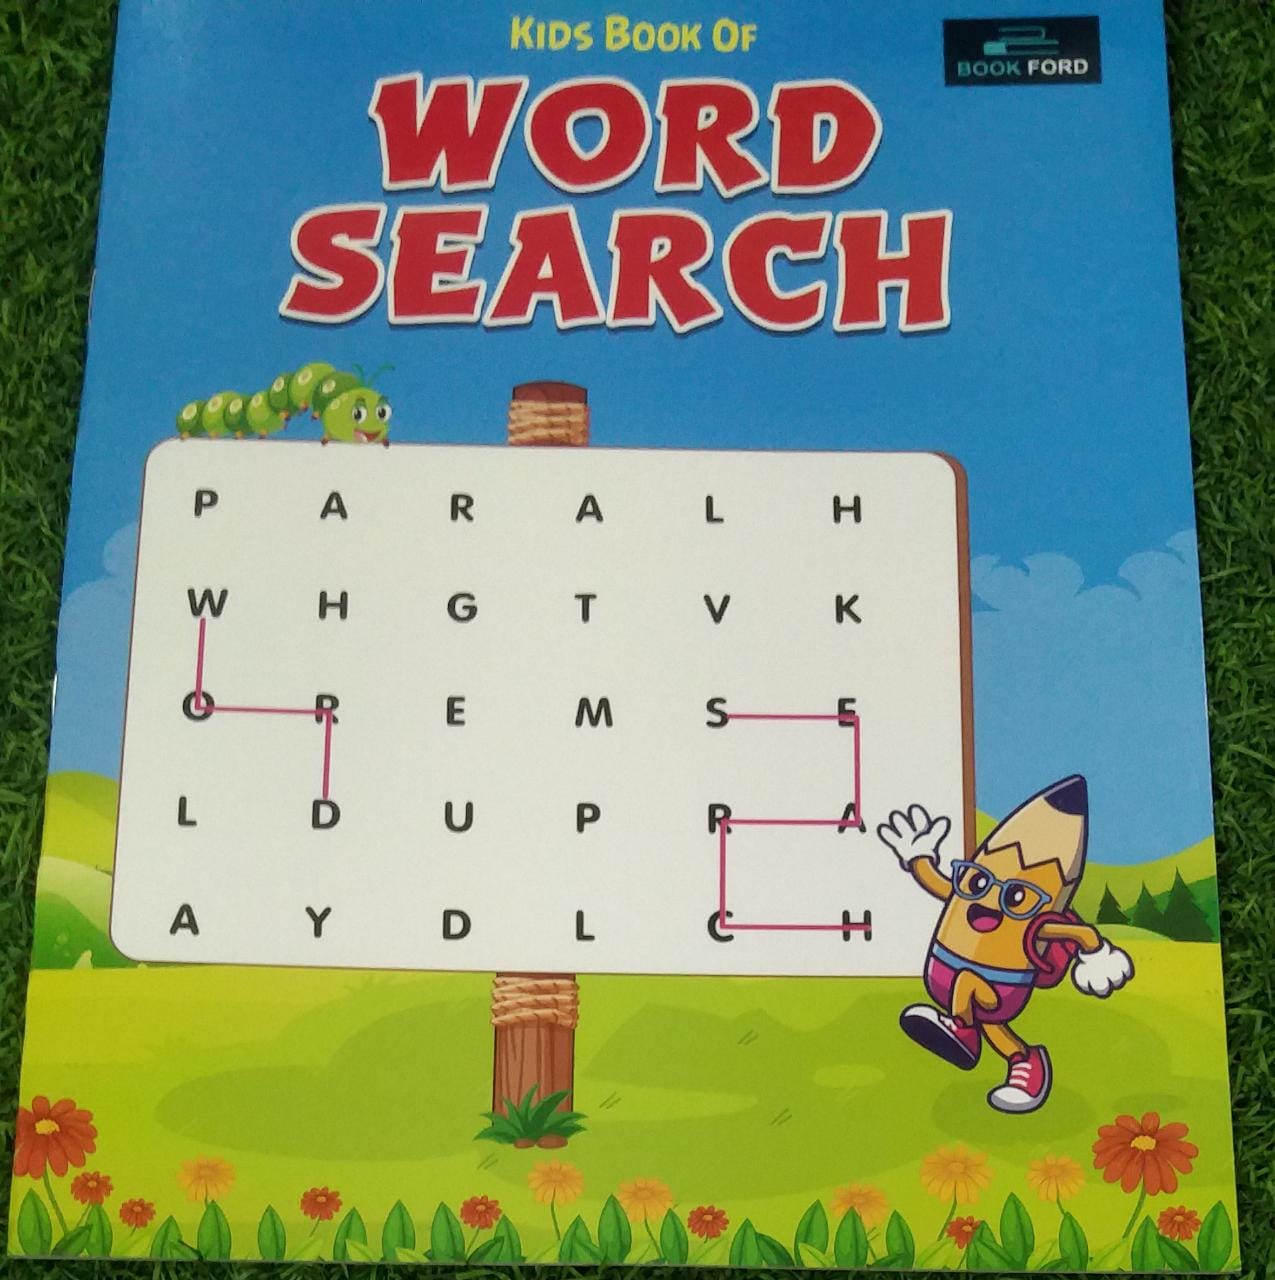 Kids Book Of Word Search